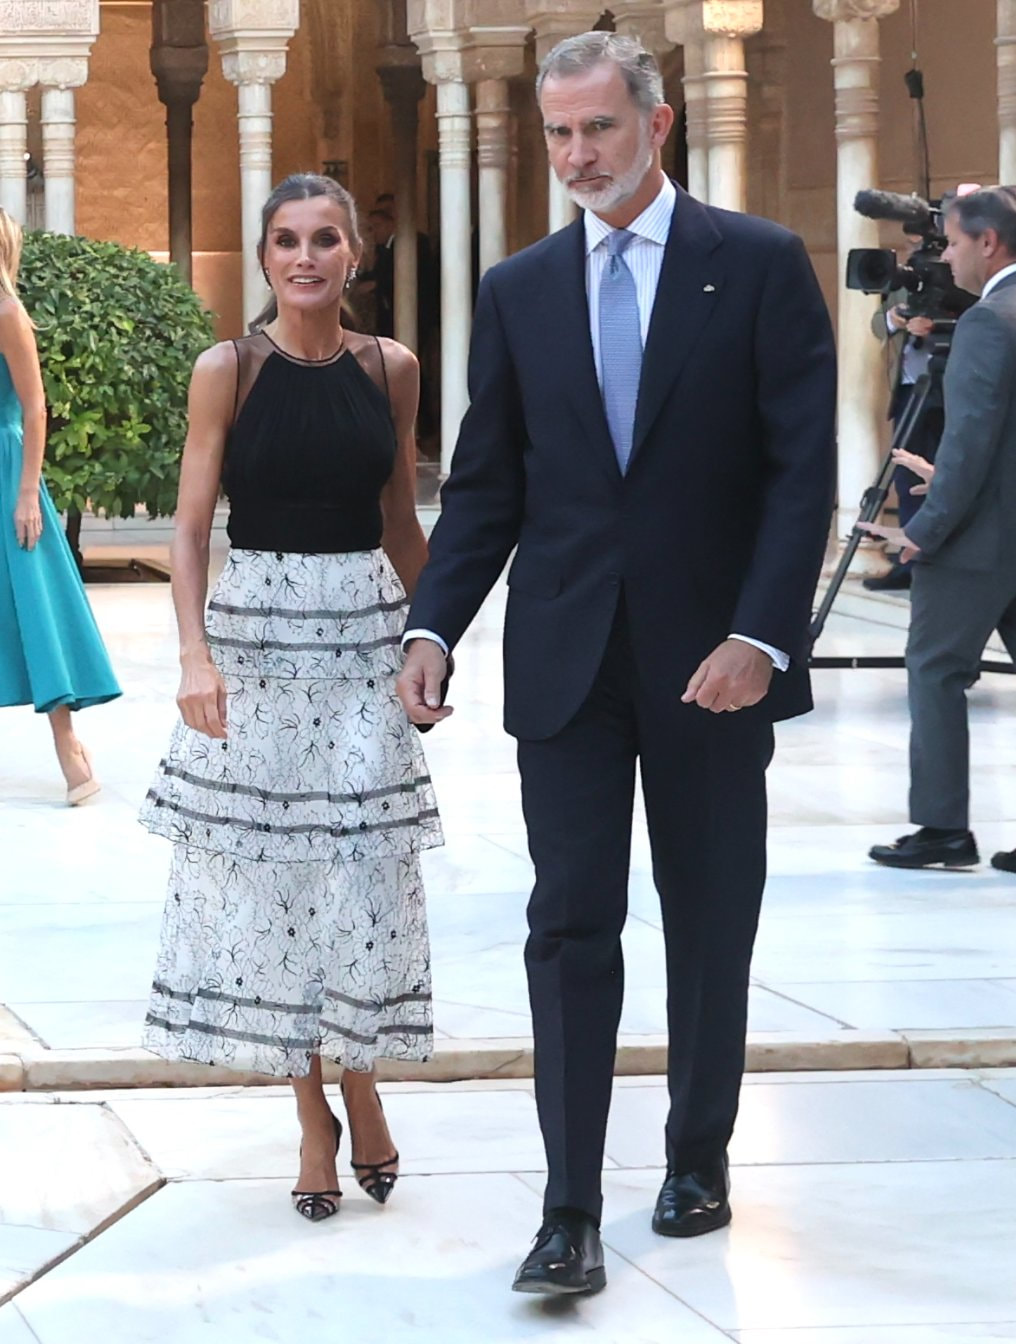 King Felipe VI and Queen Letizia attended a dinner hosted for the Heads of State and Government participating in the European Political Community Summit at the Alhambra Palace in Granada on 5th October 2023